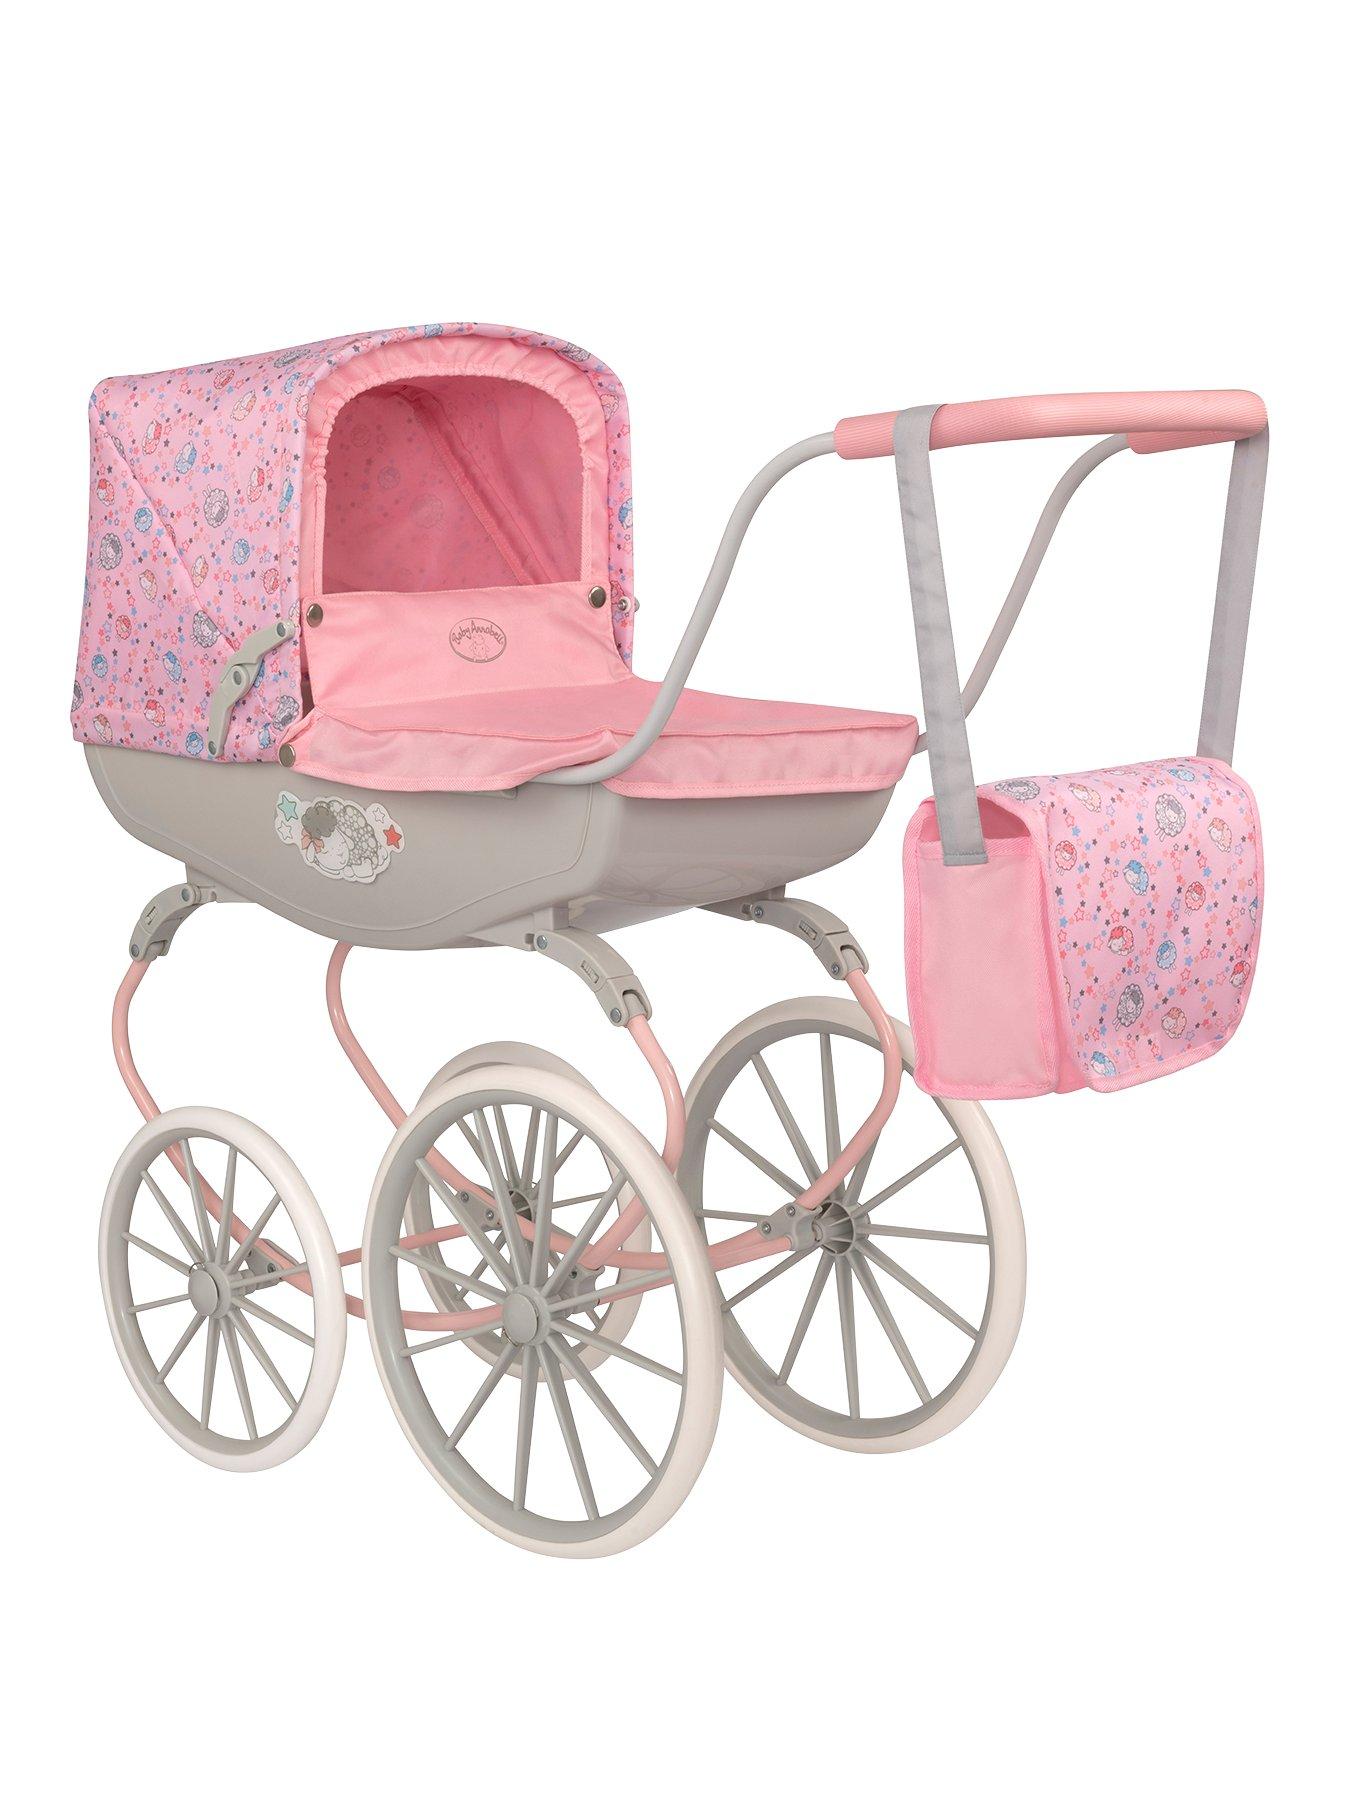 baby carriage uk